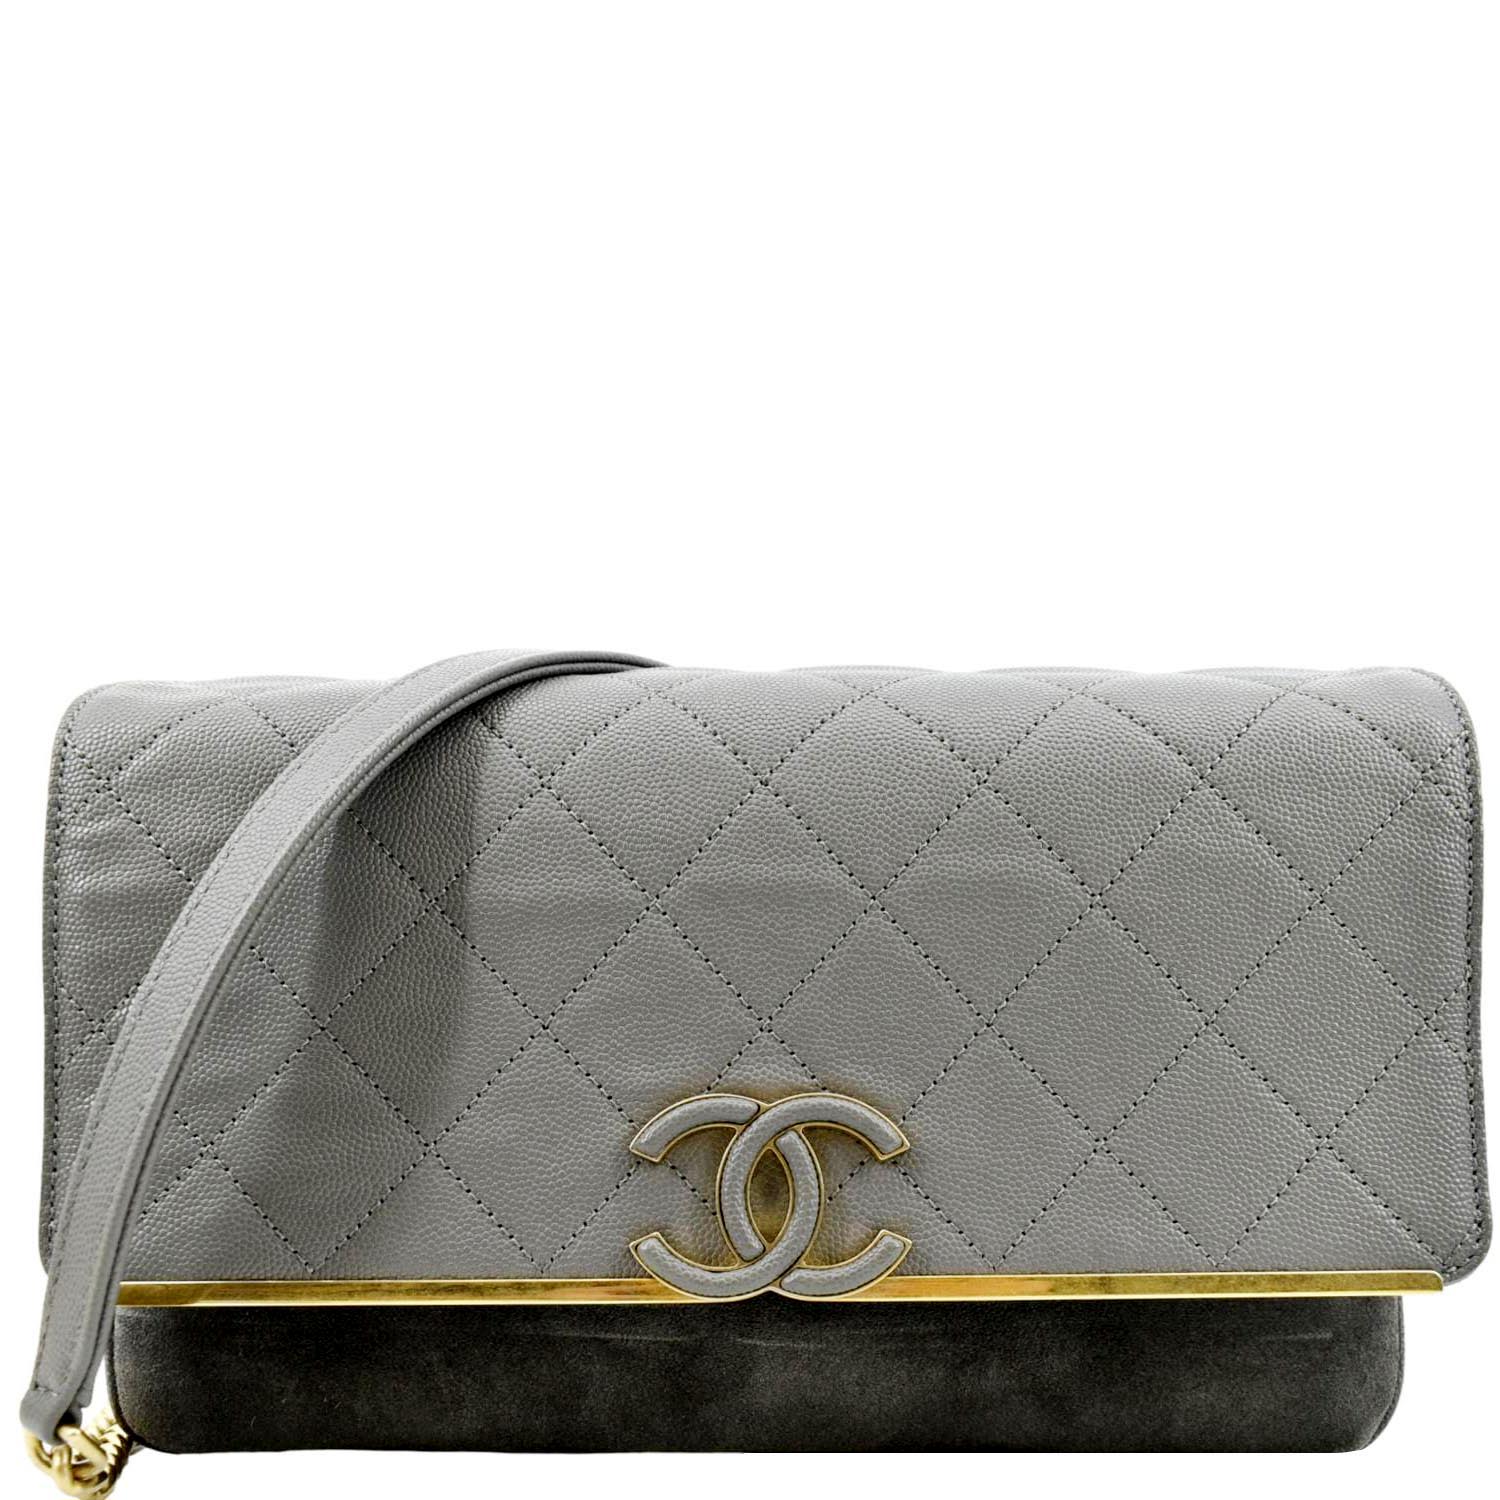 Chanel Lady Coco Flap Suede Leather Crossbody Bag